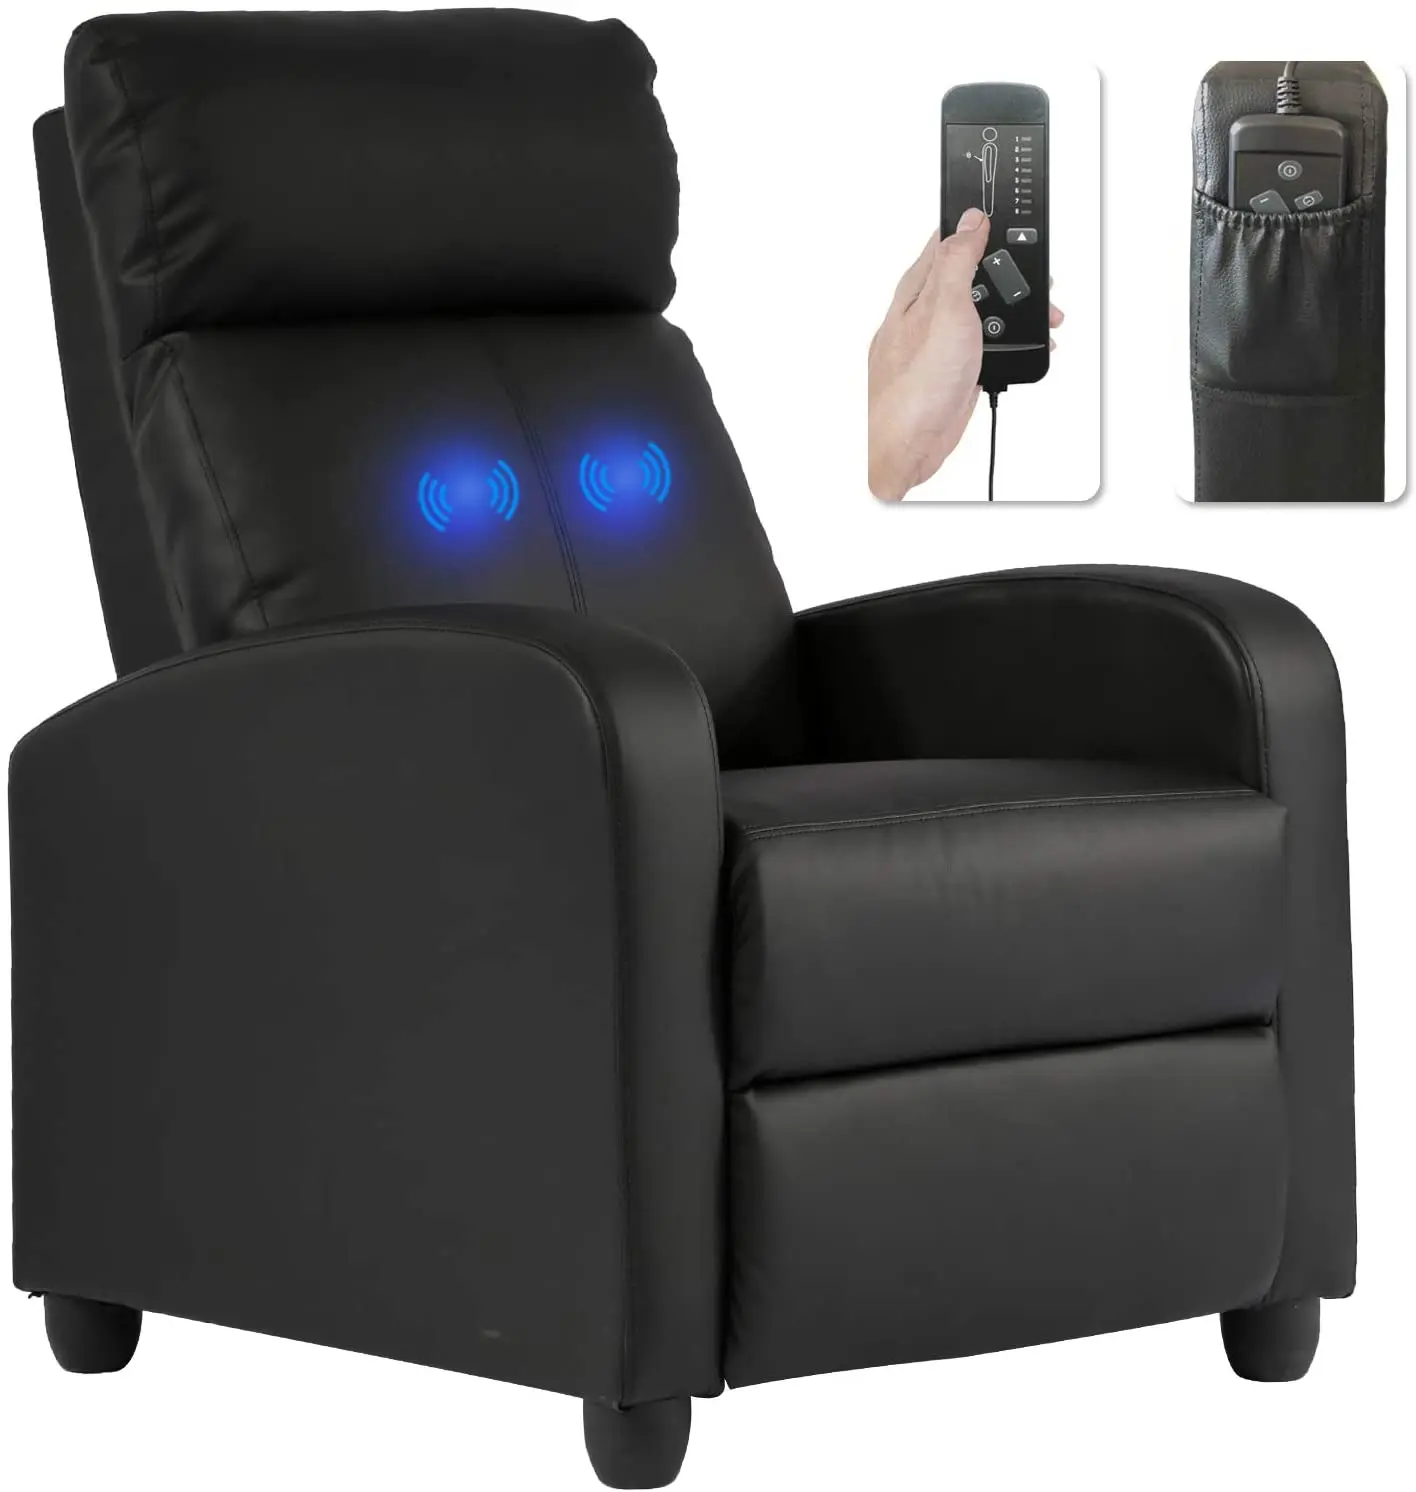 

Black Recliner Chair Living Room Armchair PU Leather Home Theater Seating Reading Watching TV Modern 160 Reclining Chair